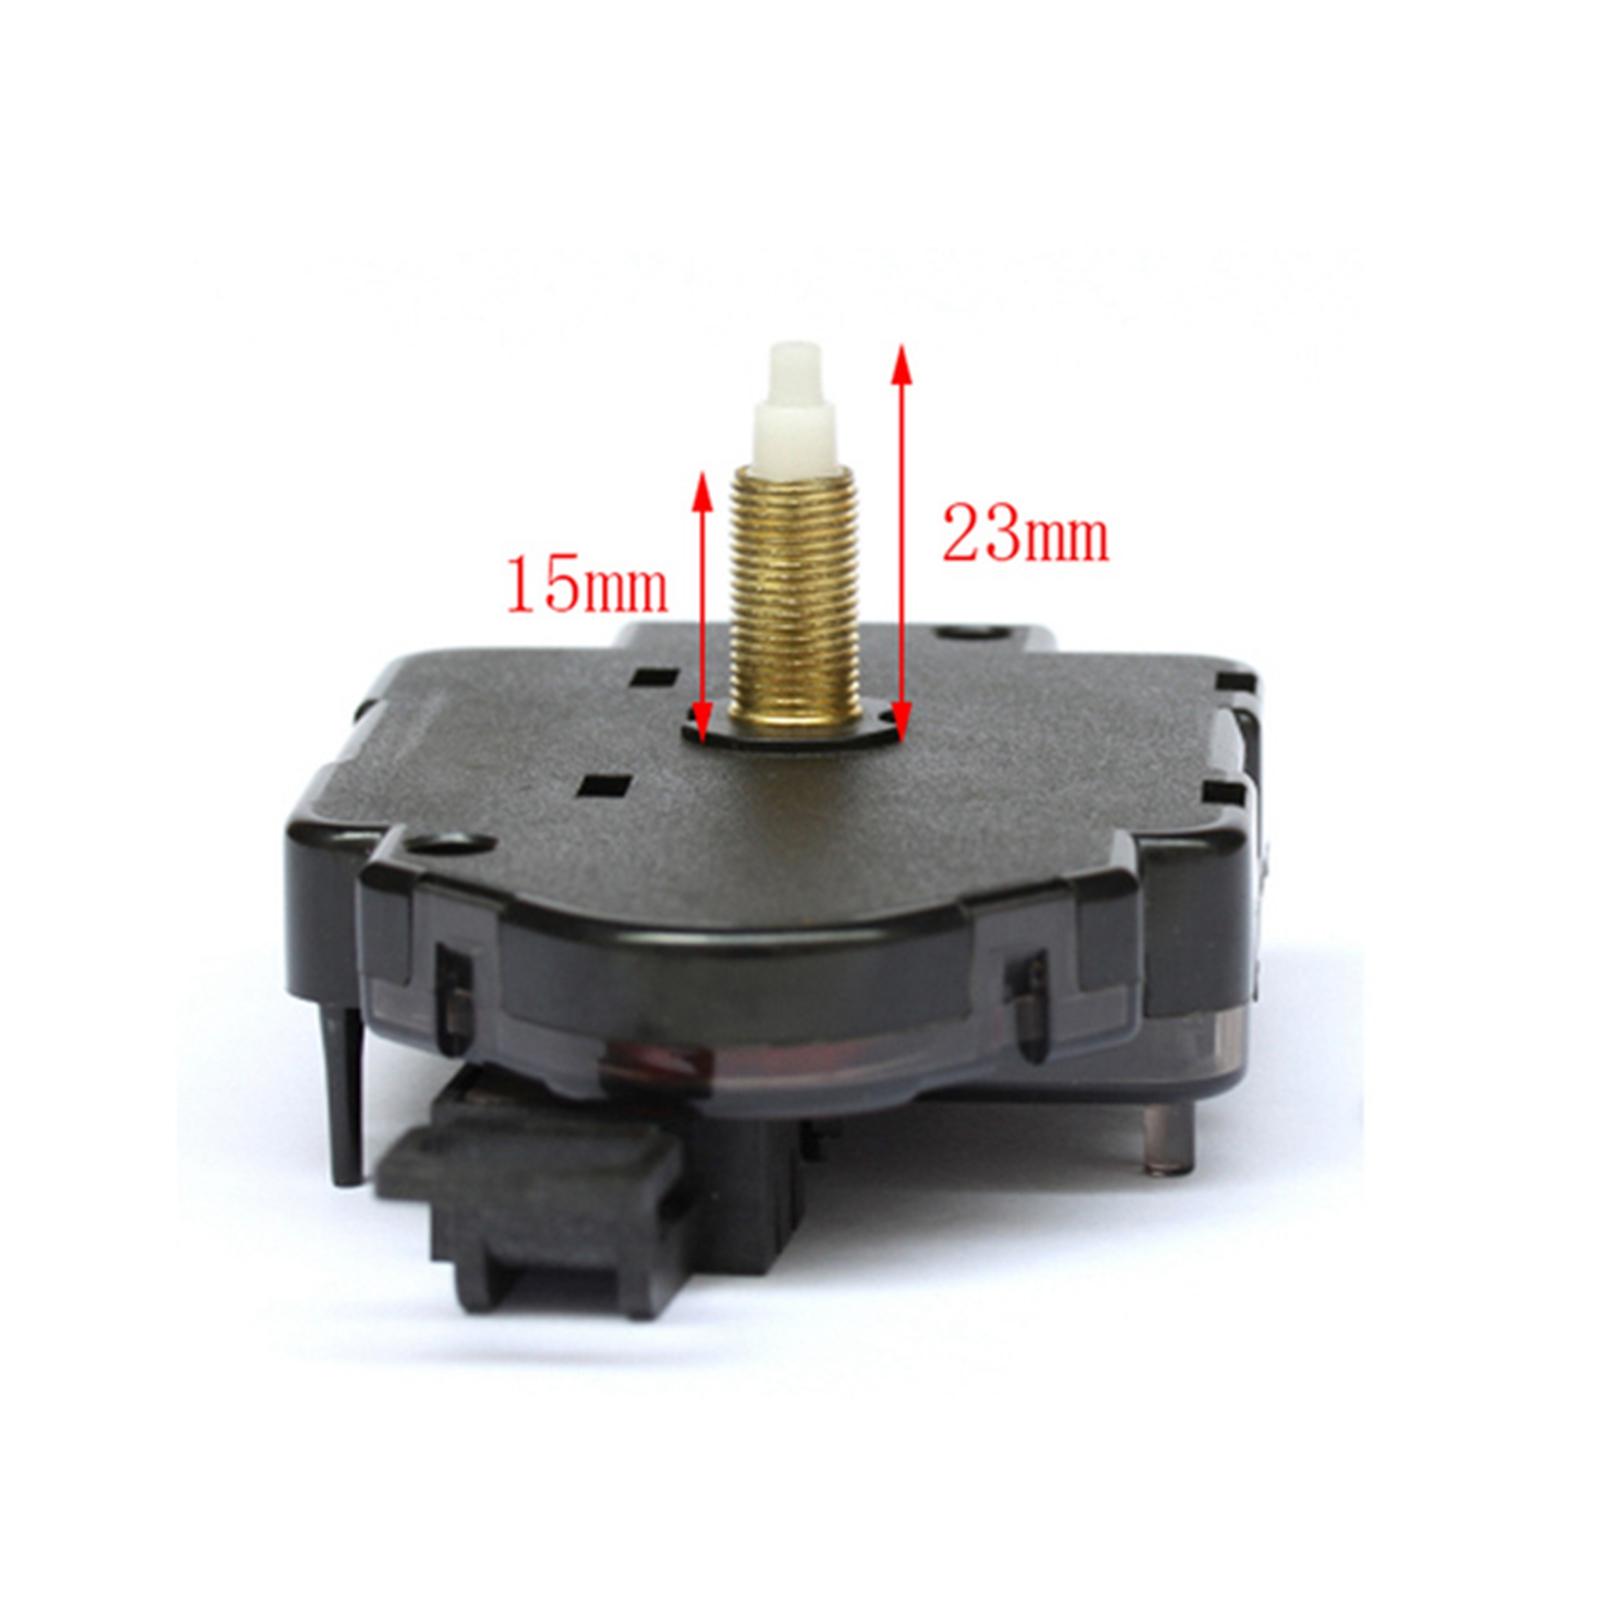 Professional Clock Movement Supplies Non Ticking Parts Accessories Style B